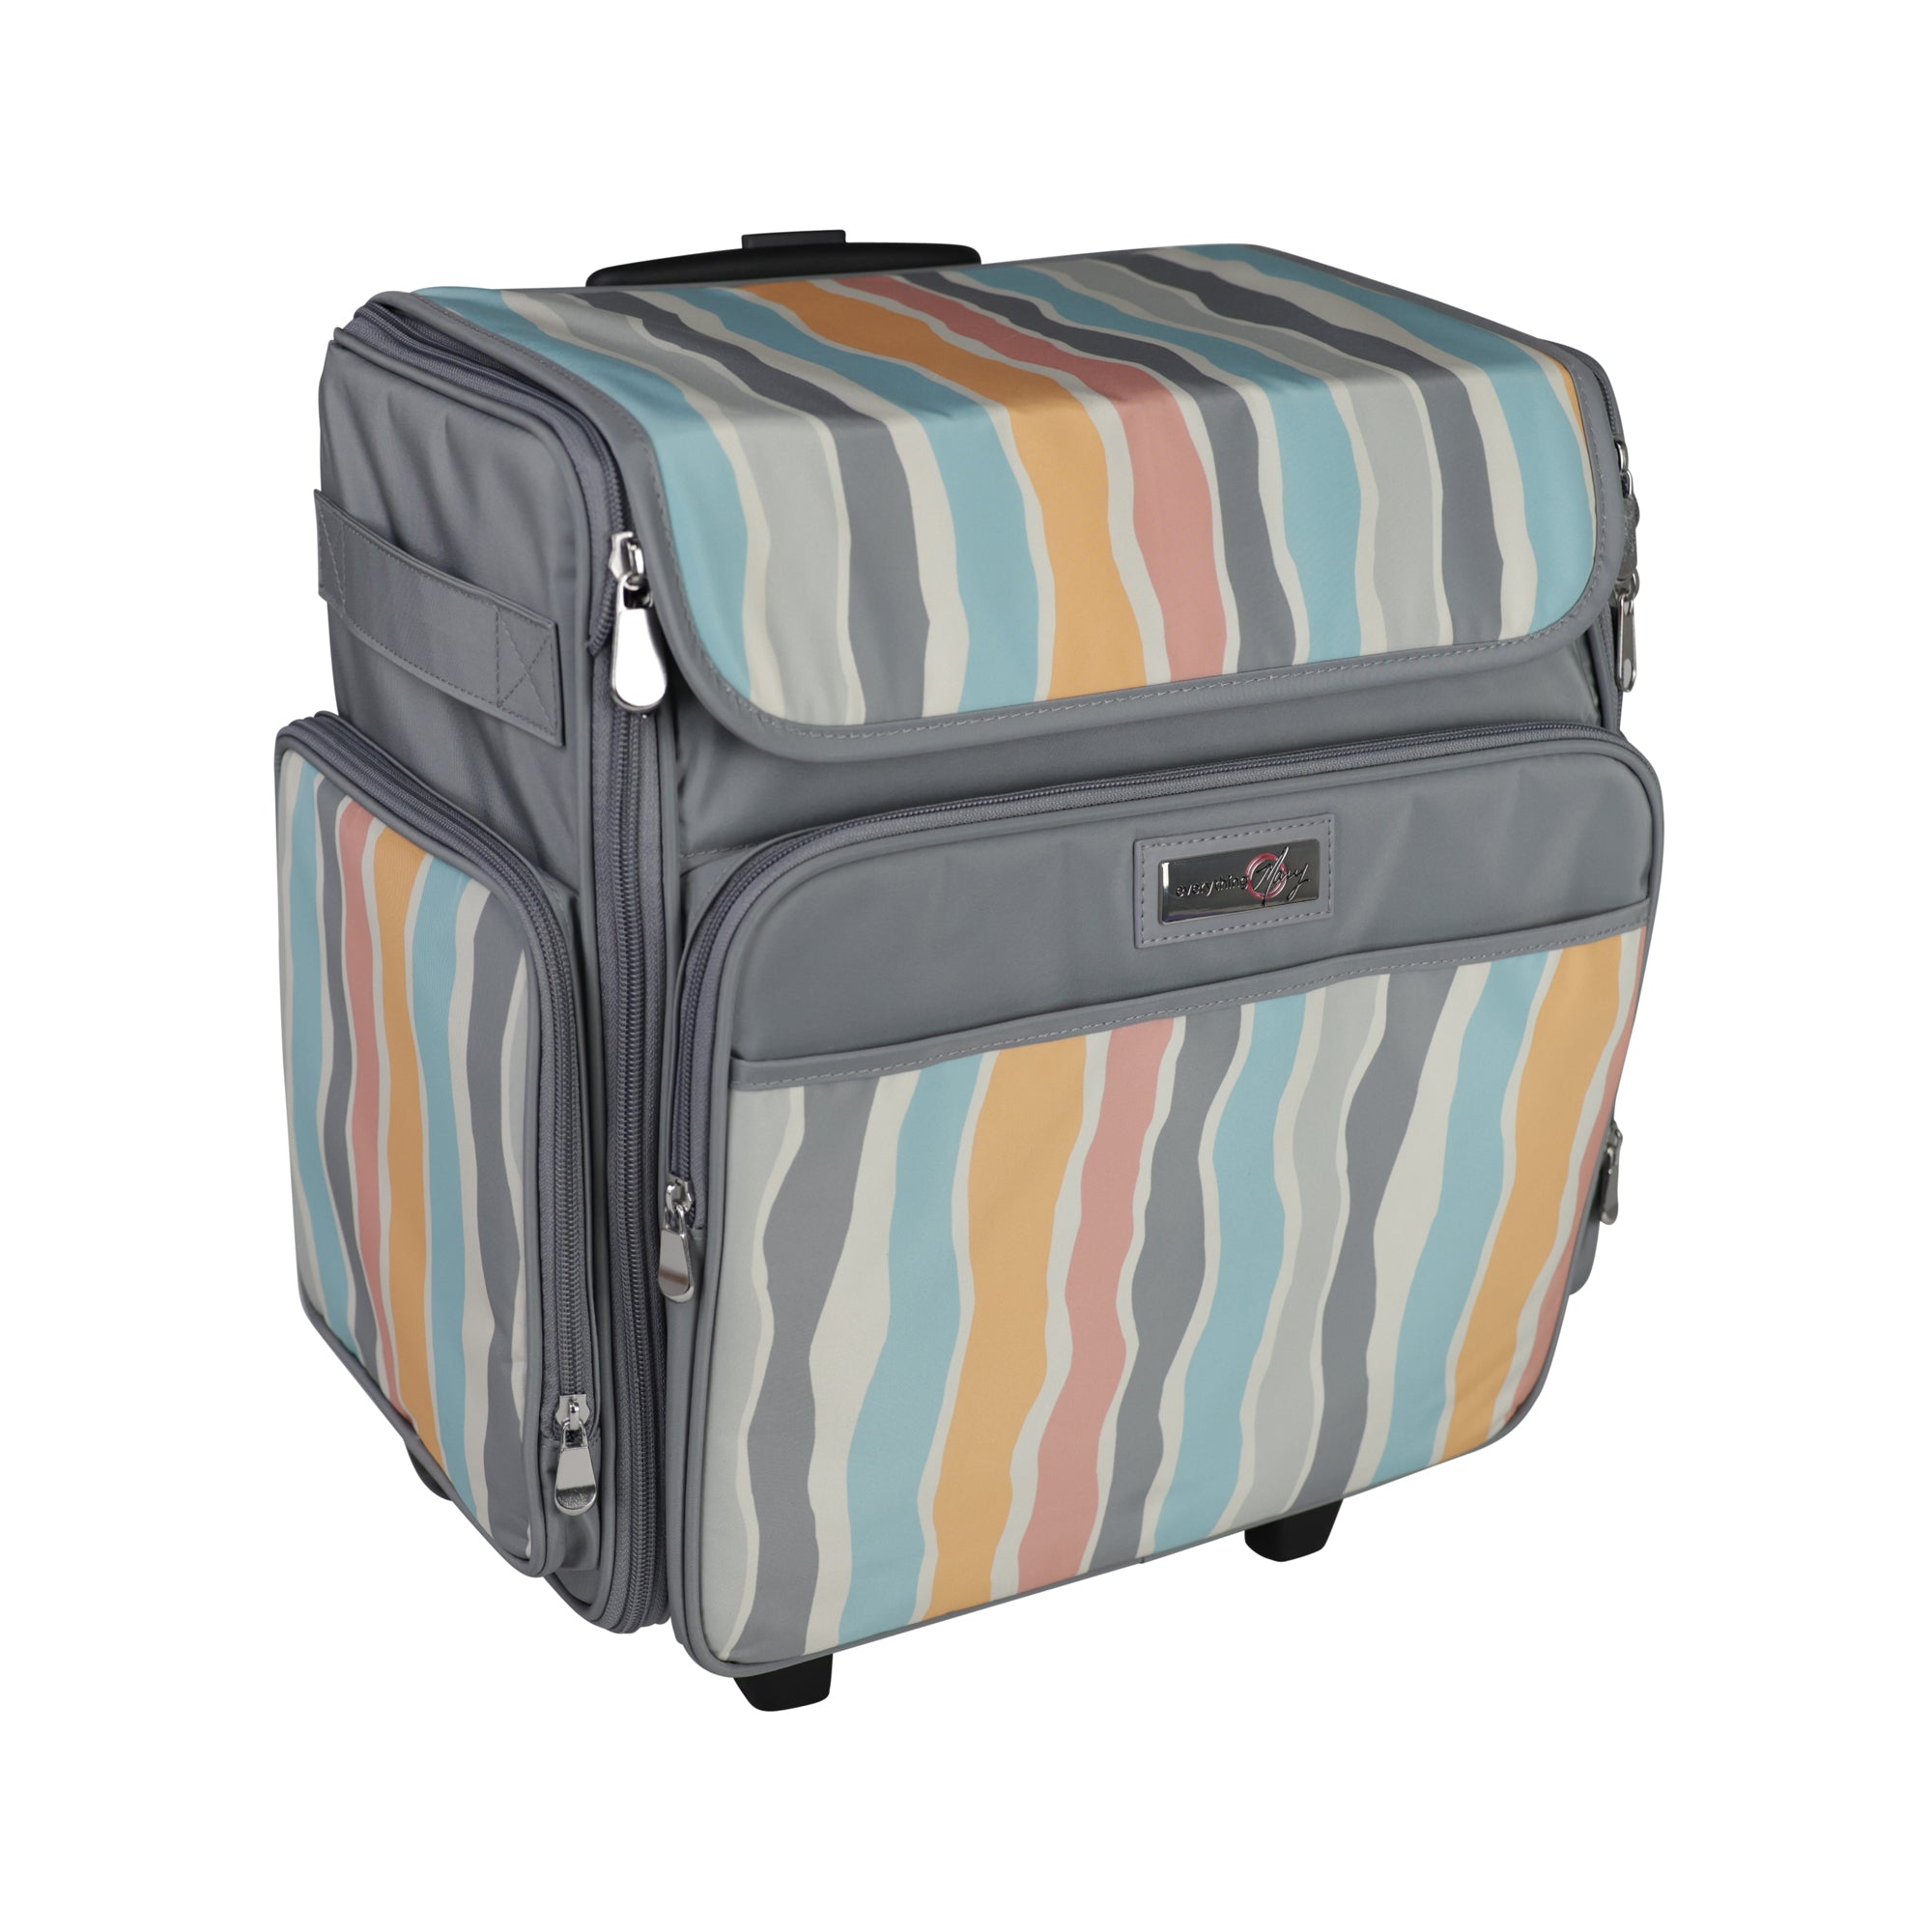 Collapsible Rolling Scrapbook & Featherweight Case, Grey & White -  Everything Mary